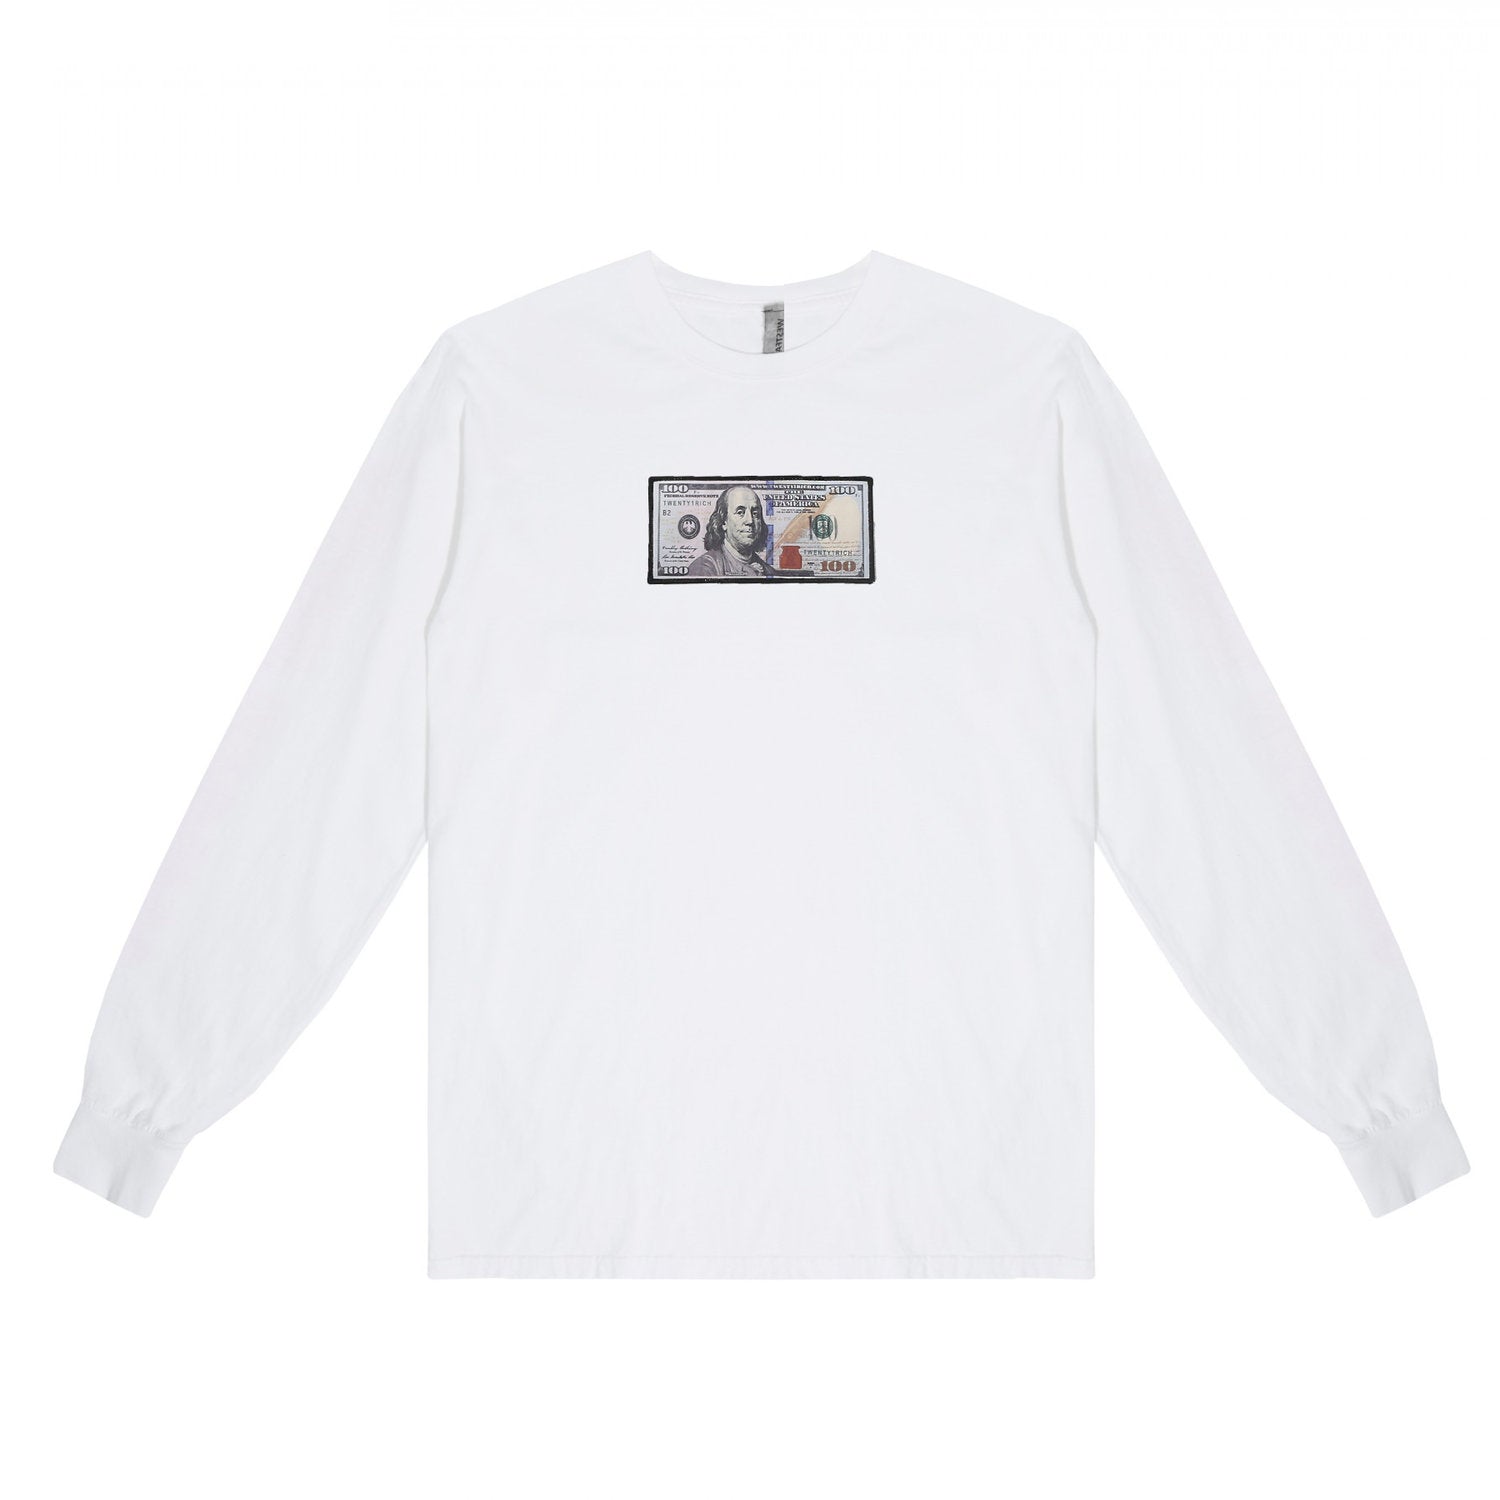 White Long Sleeve Shirt by Twenty1Rich with blue hundred logo